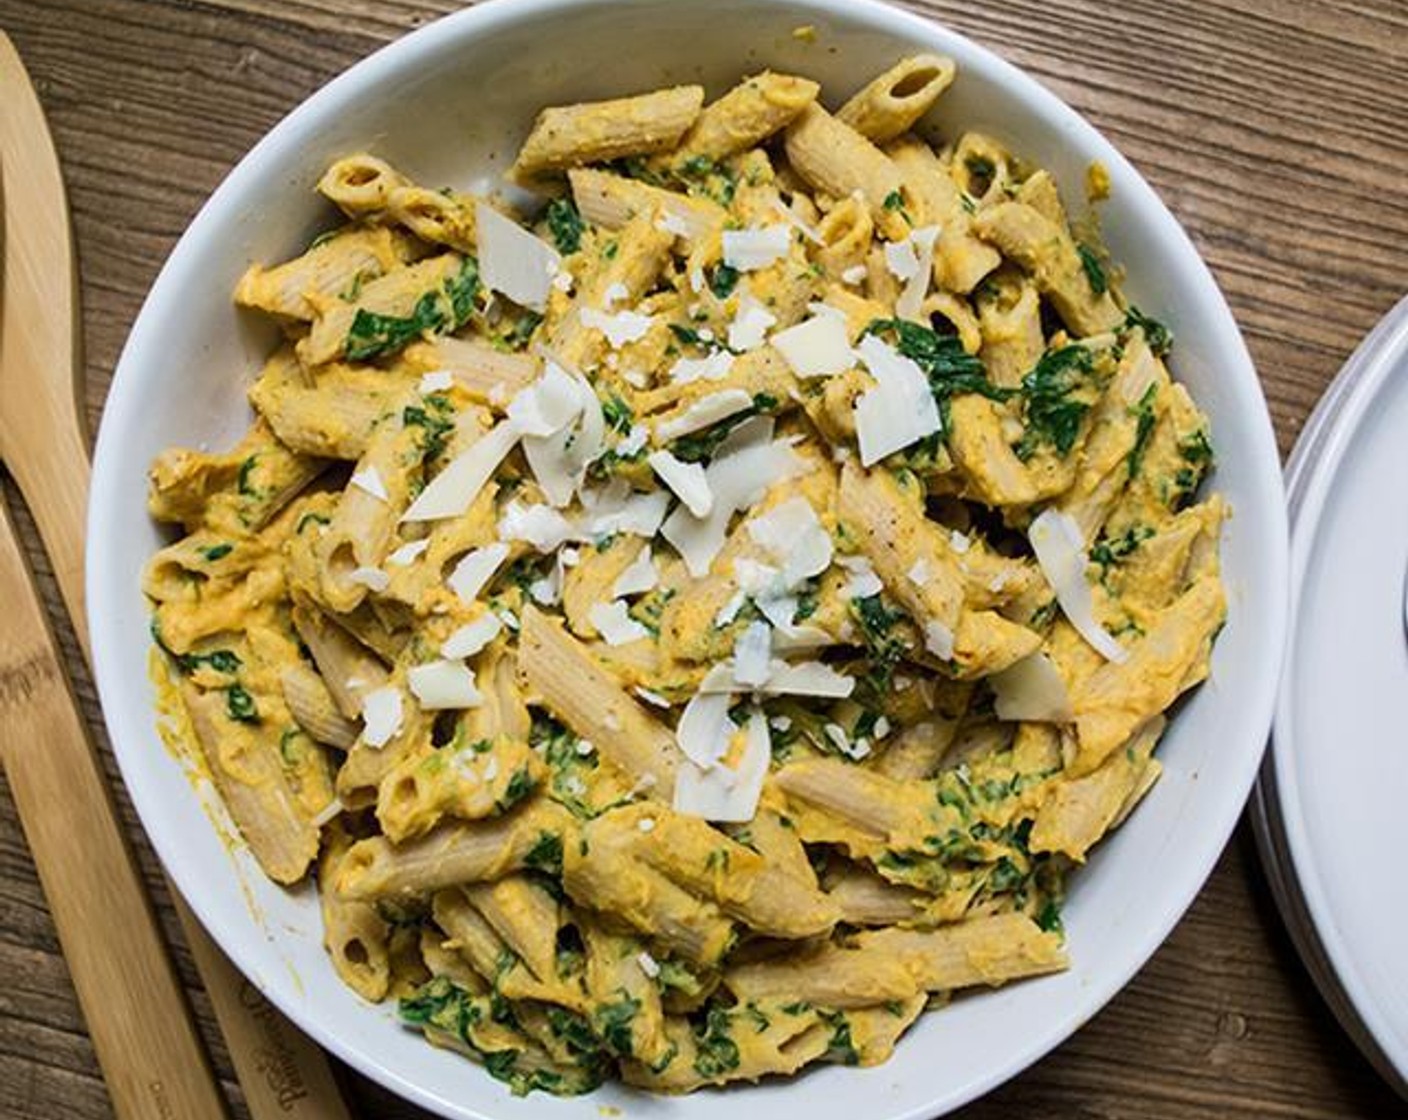 Chipotle Butternut Squash Sauce with Pasta & Spinach